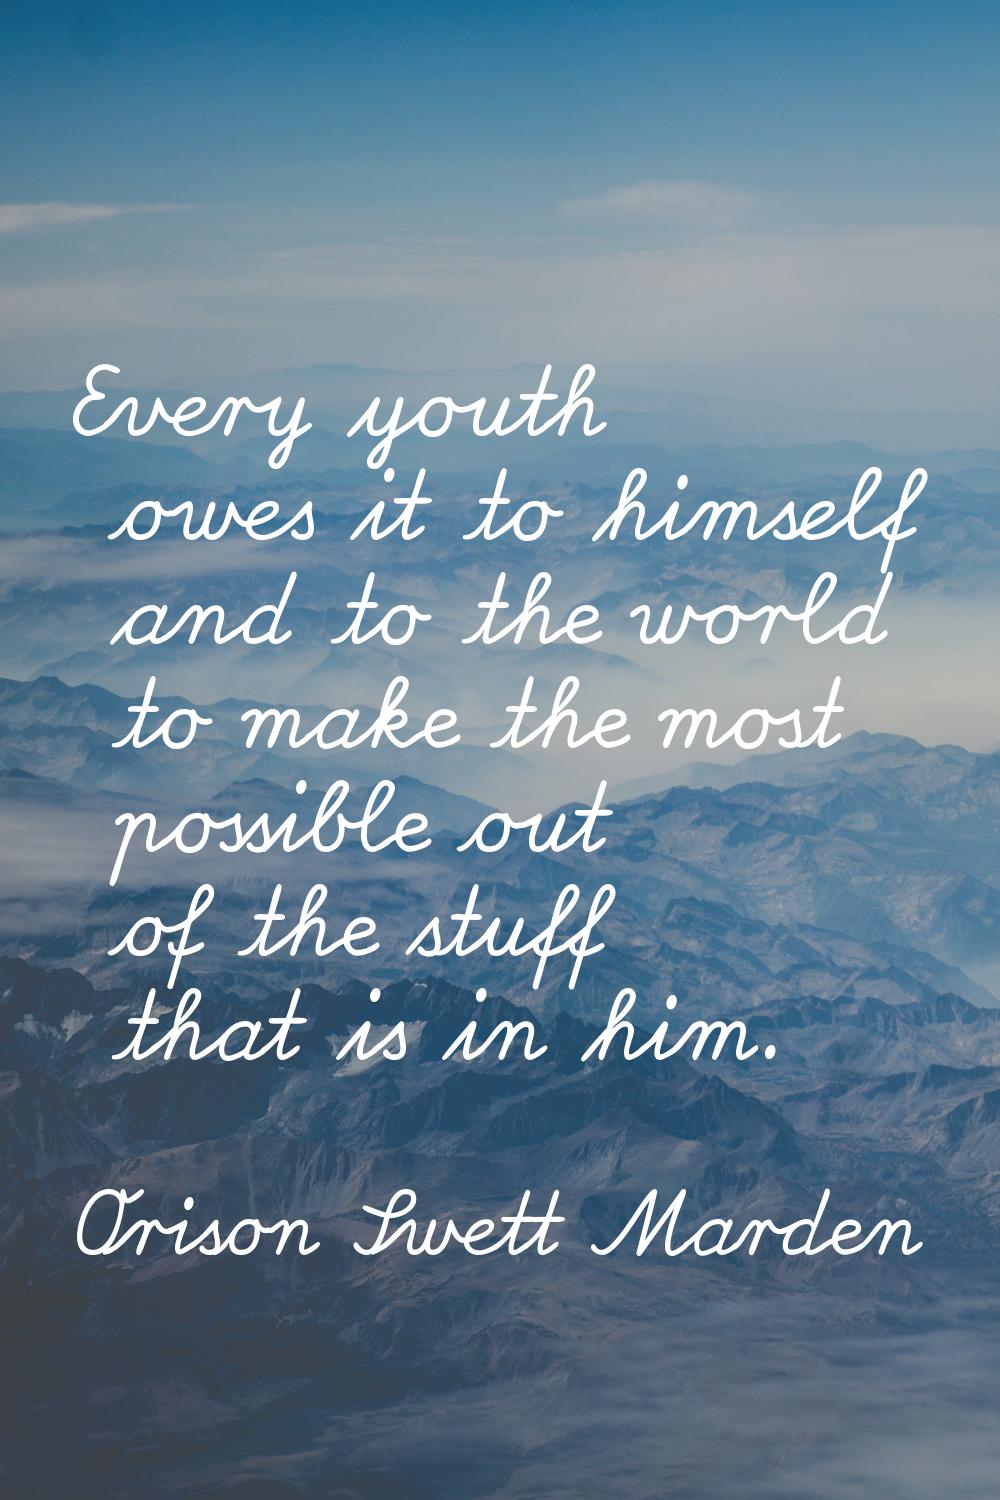 Every youth owes it to himself and to the world to make the most possible out of the stuff that is 